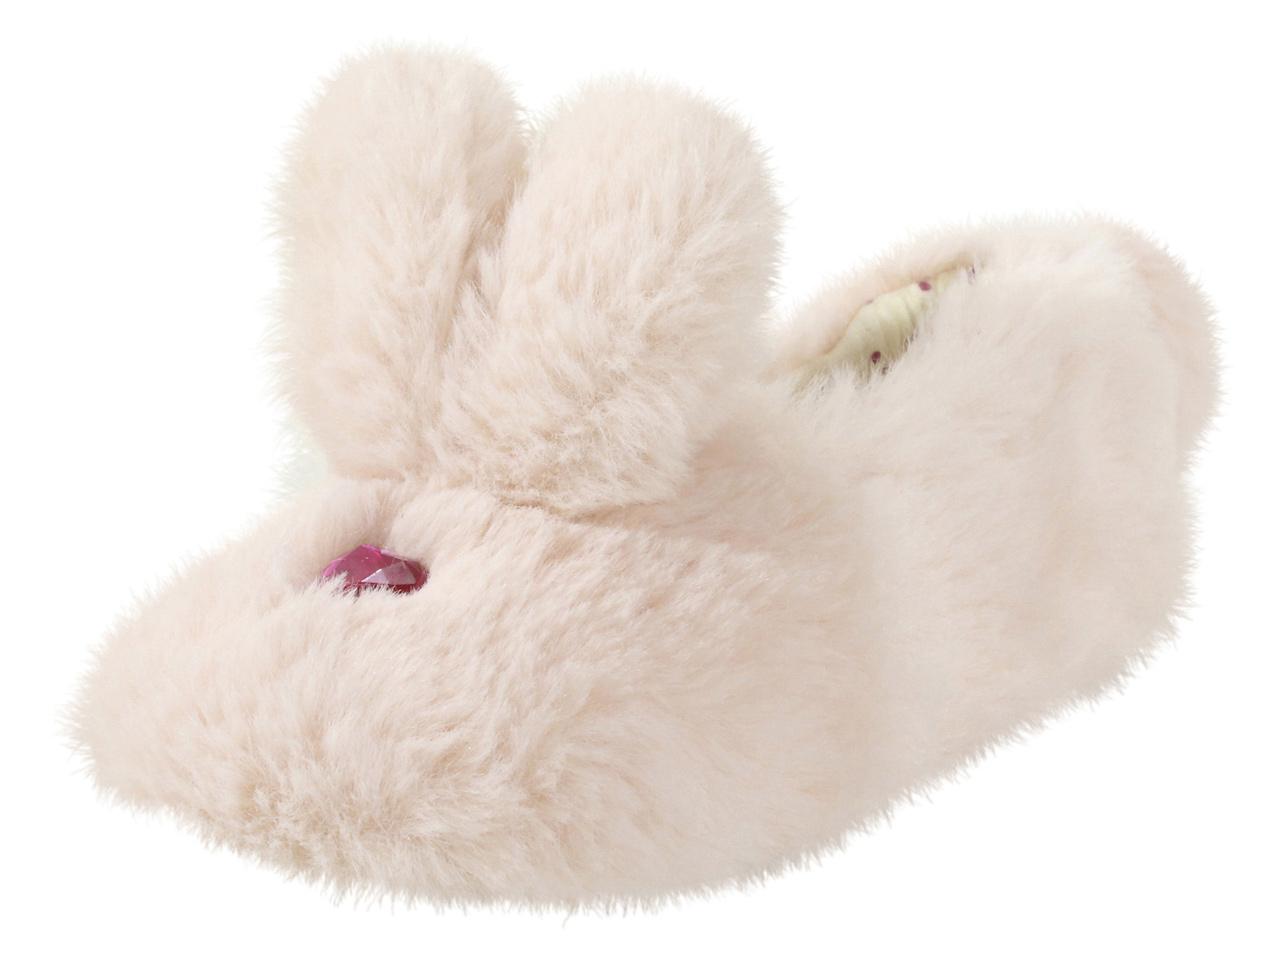 Brooke Bunny Slippers Shoes